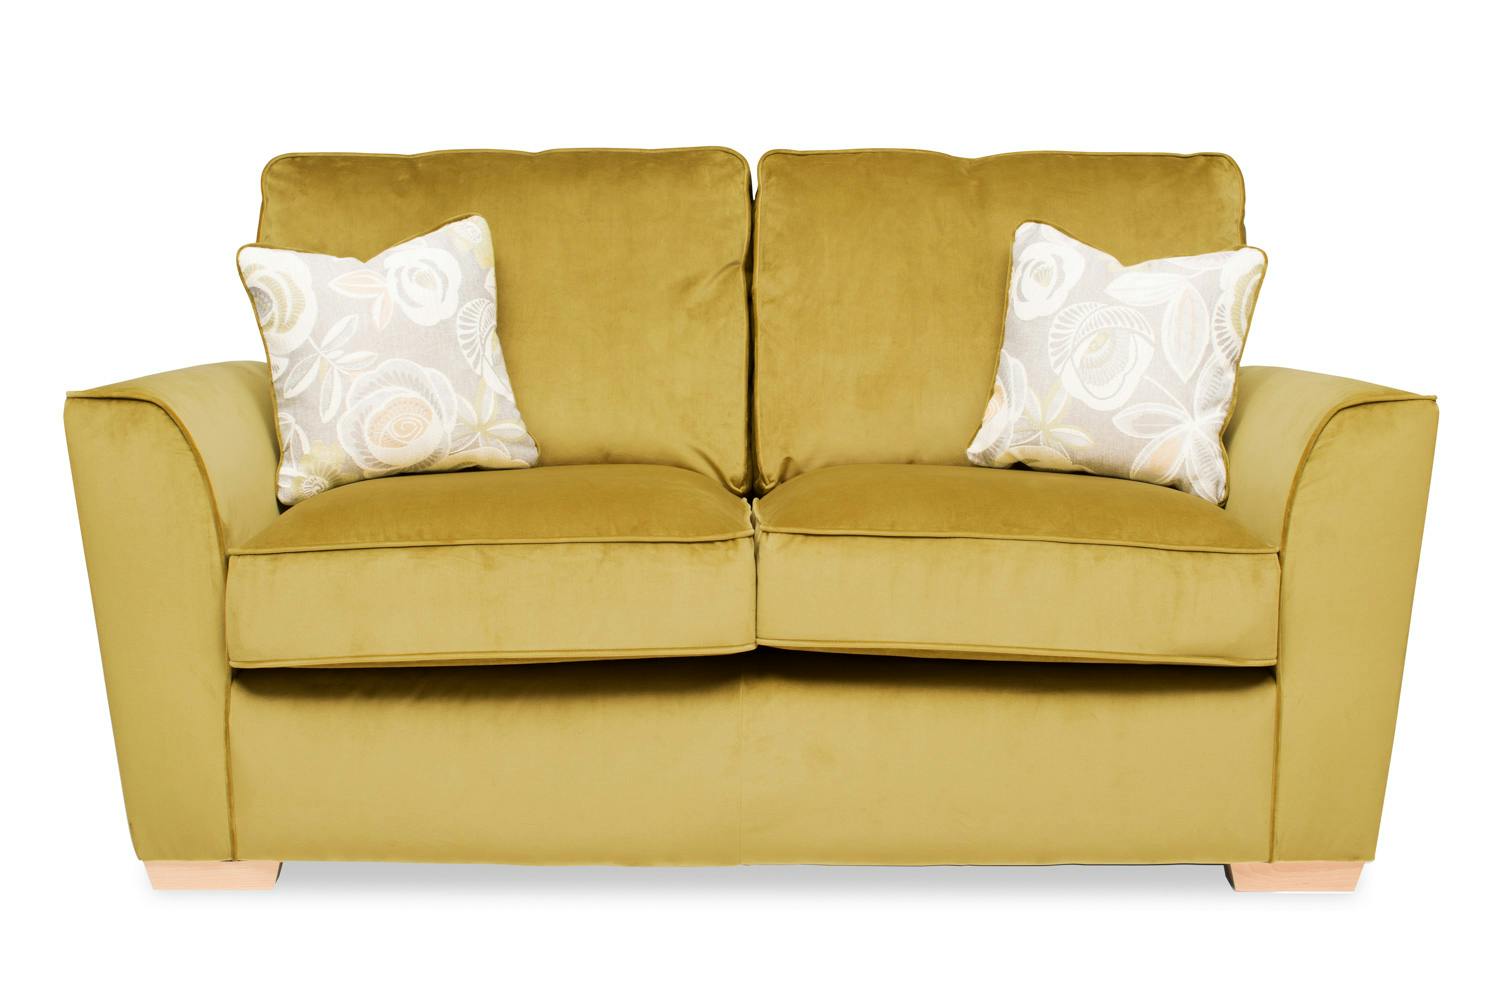 Lilly 2 Seater Sofa